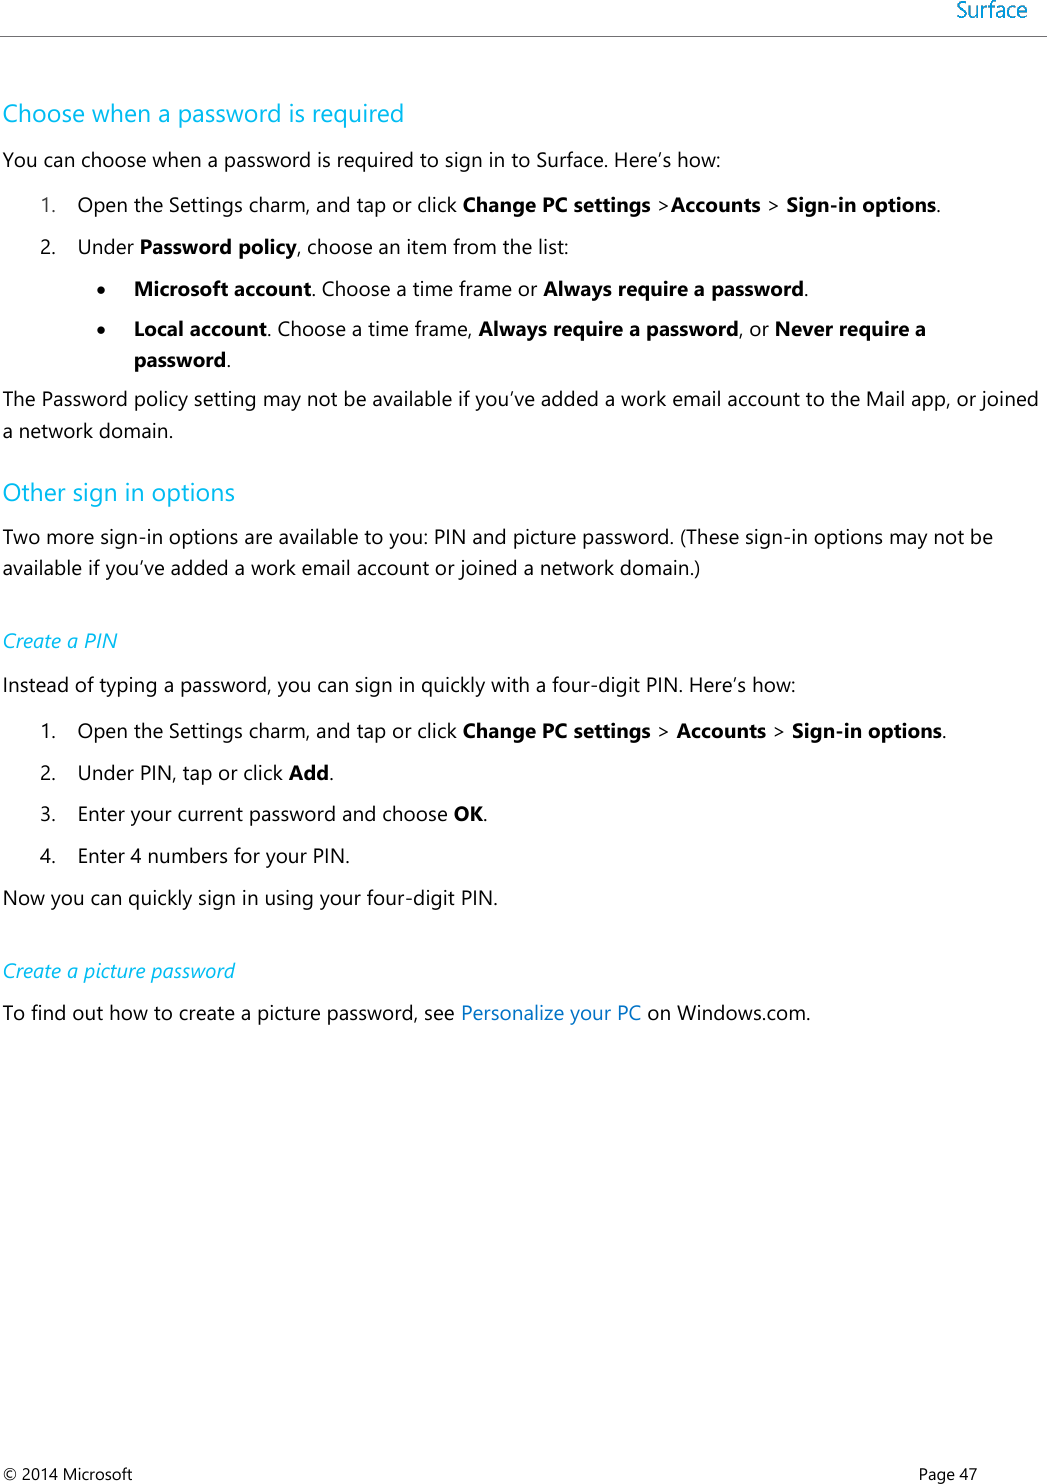  © 2014 Microsoft      Page 47  Choose when a password is required You can choose when a password is required to sign in to Surface. Here’s how: 1. Open the Settings charm, and tap or click Change PC settings &gt;Accounts &gt; Sign-in options. 2. Under Password policy, choose an item from the list:  Microsoft account. Choose a time frame or Always require a password.  Local account. Choose a time frame, Always require a password, or Never require a password. The Password policy setting may not be available if you’ve added a work email account to the Mail app, or joined a network domain.  Other sign in options Two more sign-in options are available to you: PIN and picture password. (These sign-in options may not be available if you’ve added a work email account or joined a network domain.)  Create a PIN Instead of typing a password, you can sign in quickly with a four-digit PIN. Here’s how:  1. Open the Settings charm, and tap or click Change PC settings &gt; Accounts &gt; Sign-in options.  2. Under PIN, tap or click Add.  3. Enter your current password and choose OK.  4. Enter 4 numbers for your PIN.  Now you can quickly sign in using your four-digit PIN.  Create a picture password To find out how to create a picture password, see Personalize your PC on Windows.com.    